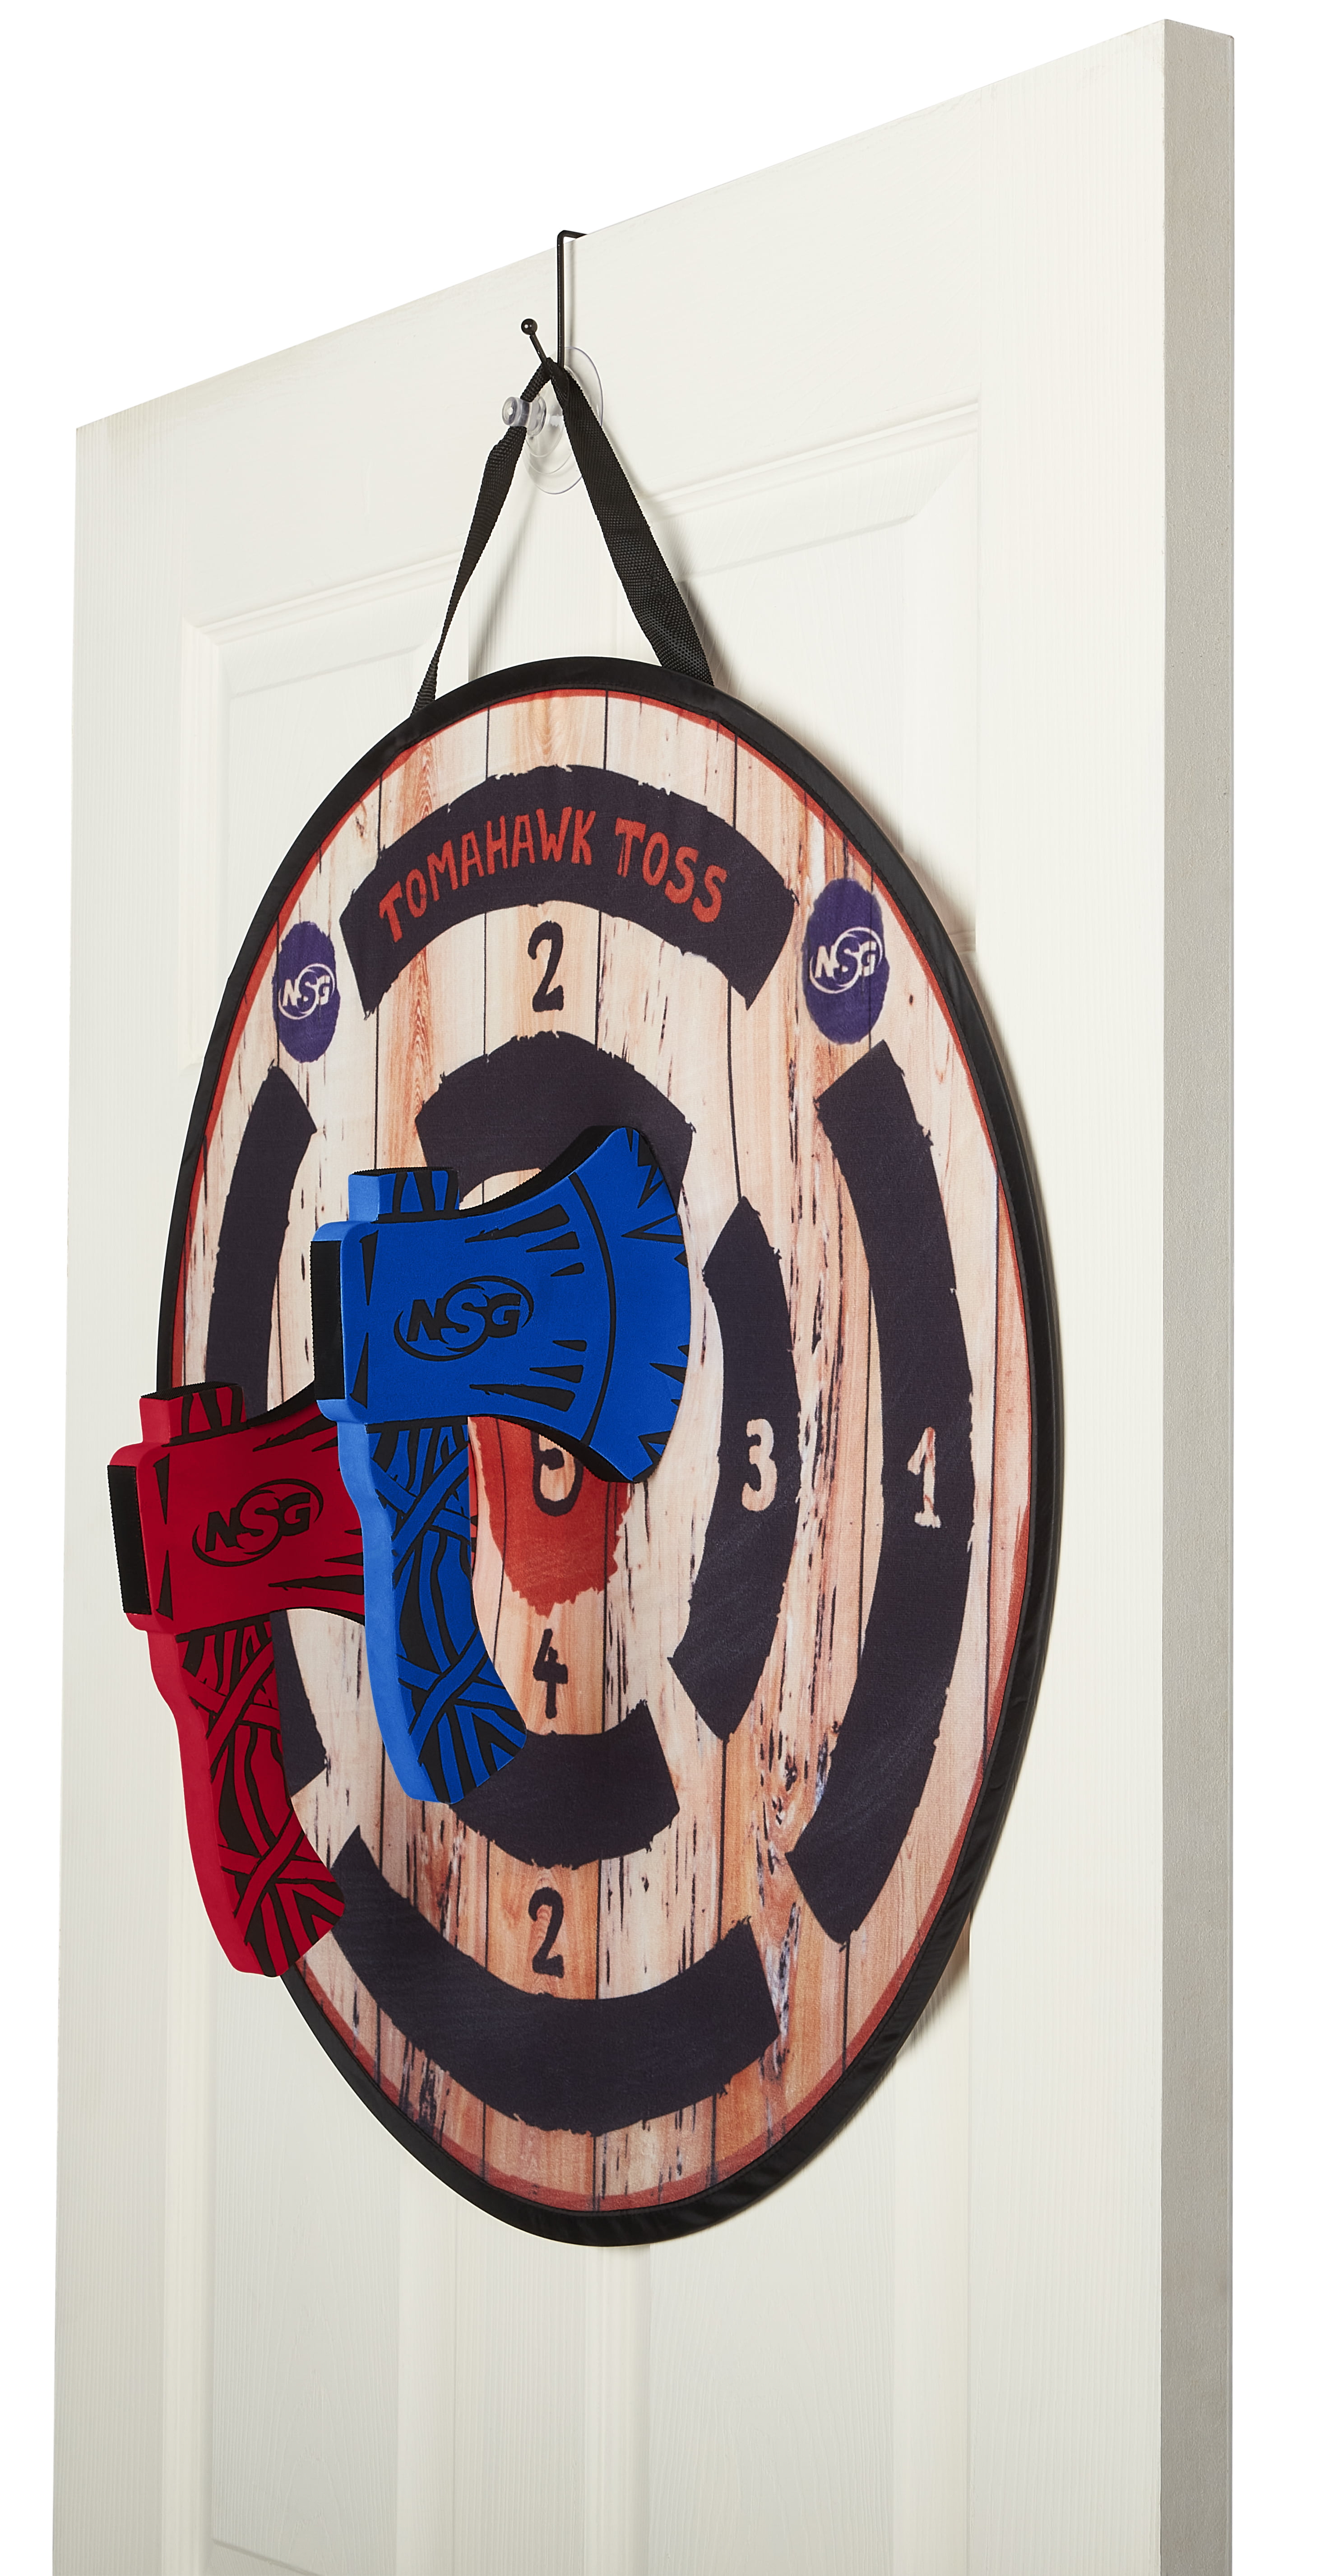 NSG Tomahawk Toss Axe Throwing Set for Kids - Two Lightweight Velcro  Wrapped Foam Axes with Large Easy Stick Target - Ages 3+ - Walmart.com